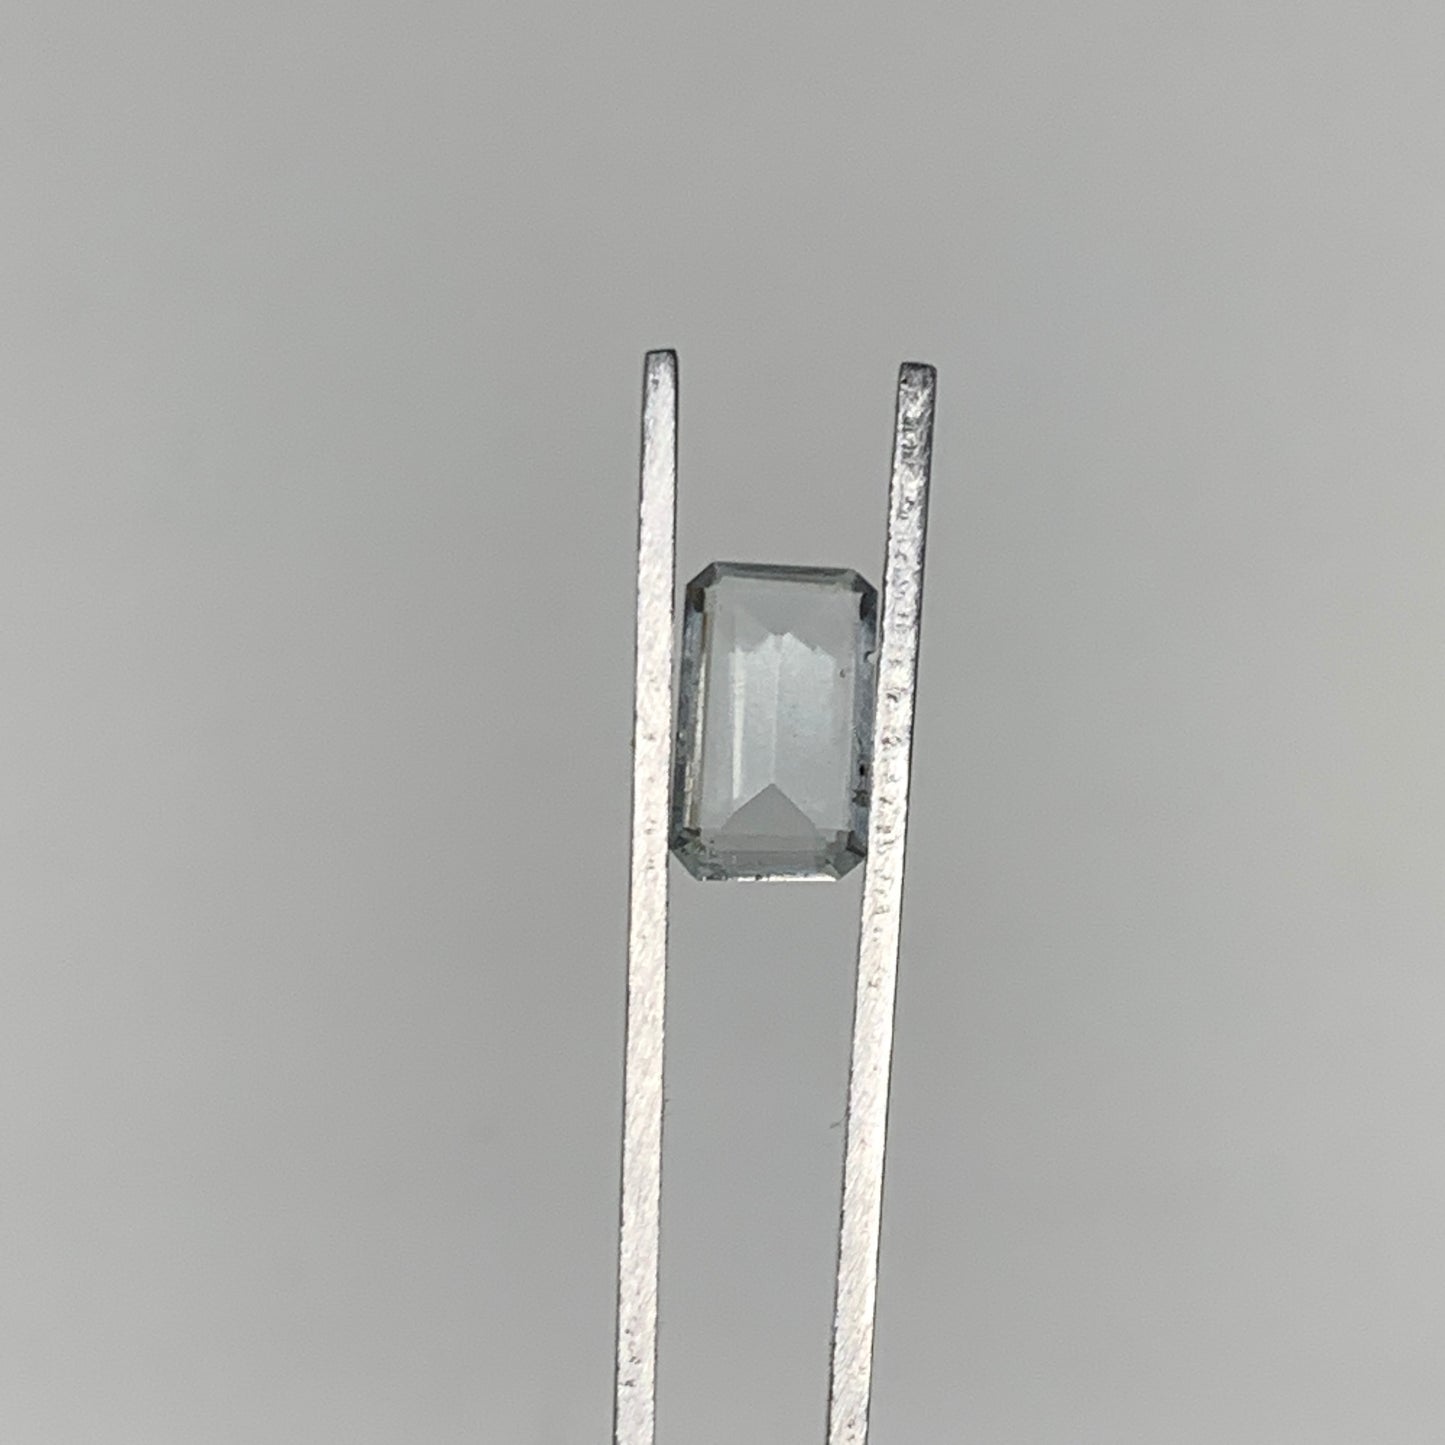 2.14cts, 10mmx6mmx3mm, Aquamarine Crystal Facetted Stone Loose @Pakistan,CTS160